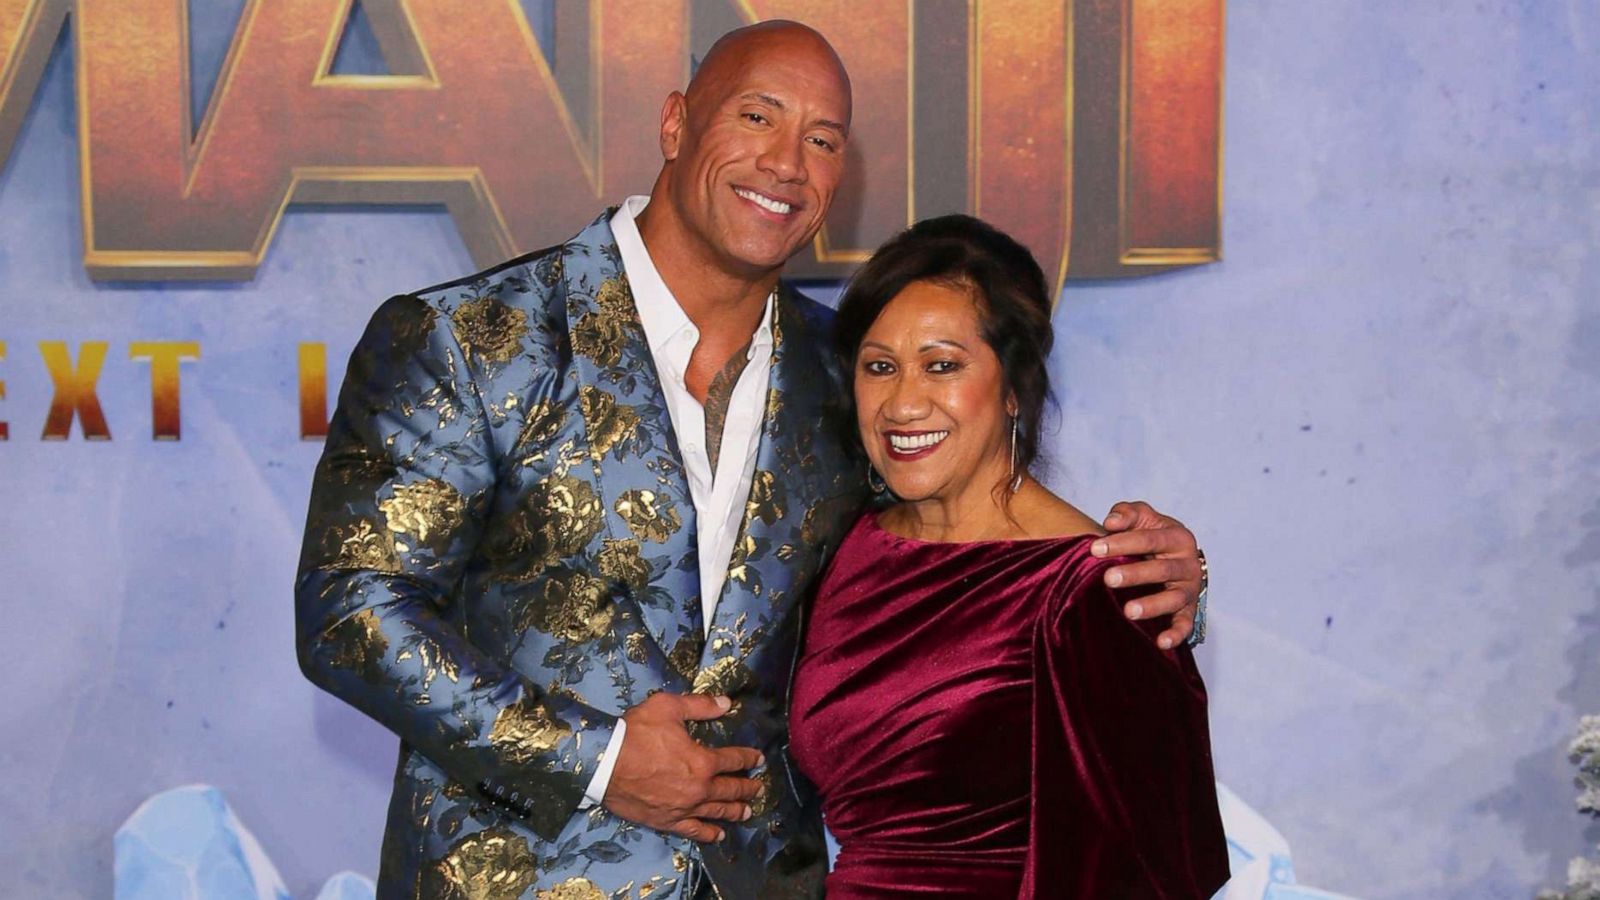 PHOTO: Dwayne Johnson and his mother Ata Johnson attend the premiere of "Jumanji: The Next Level" in Hollywood on Dec. 9, 2019.